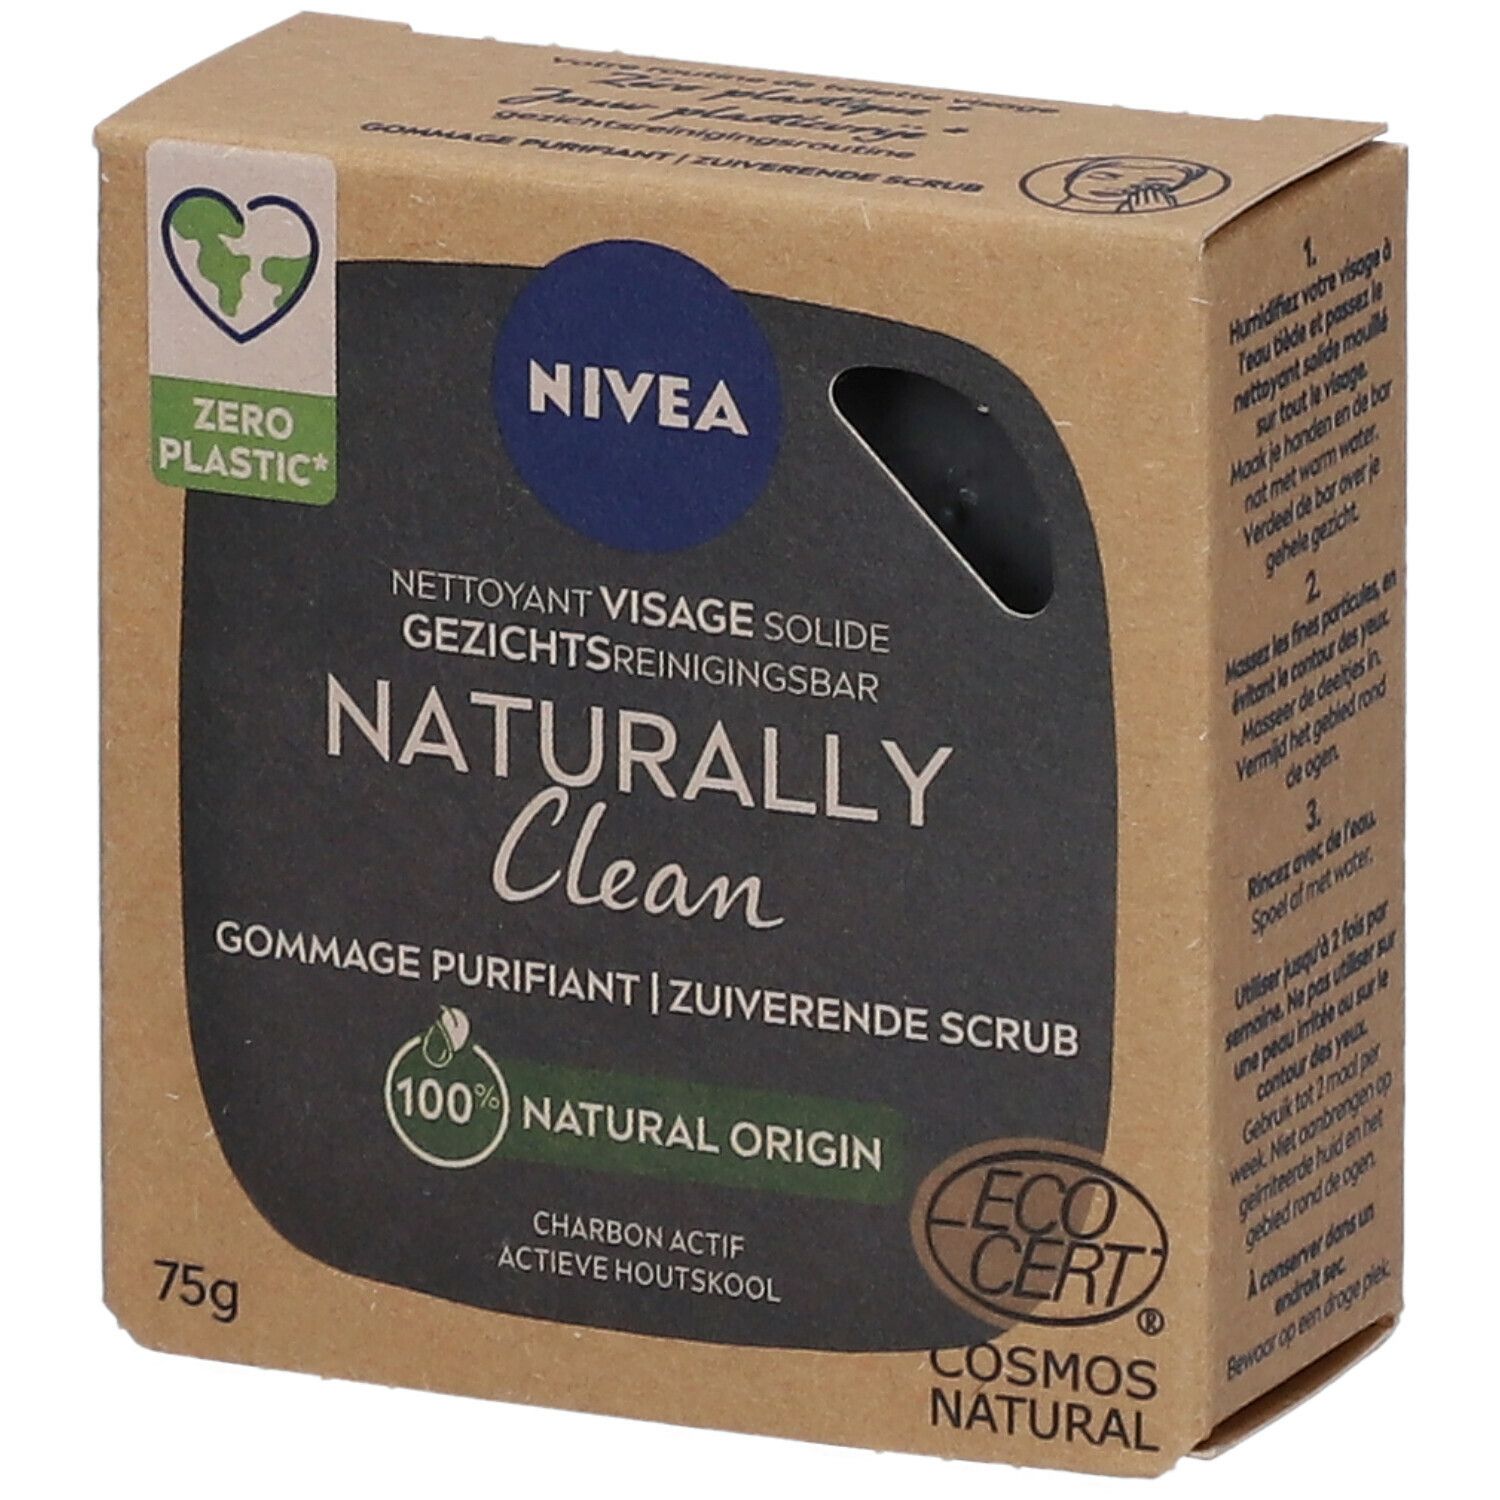 Nivea Naturally Clean Gommage Solide Visage Purifiant